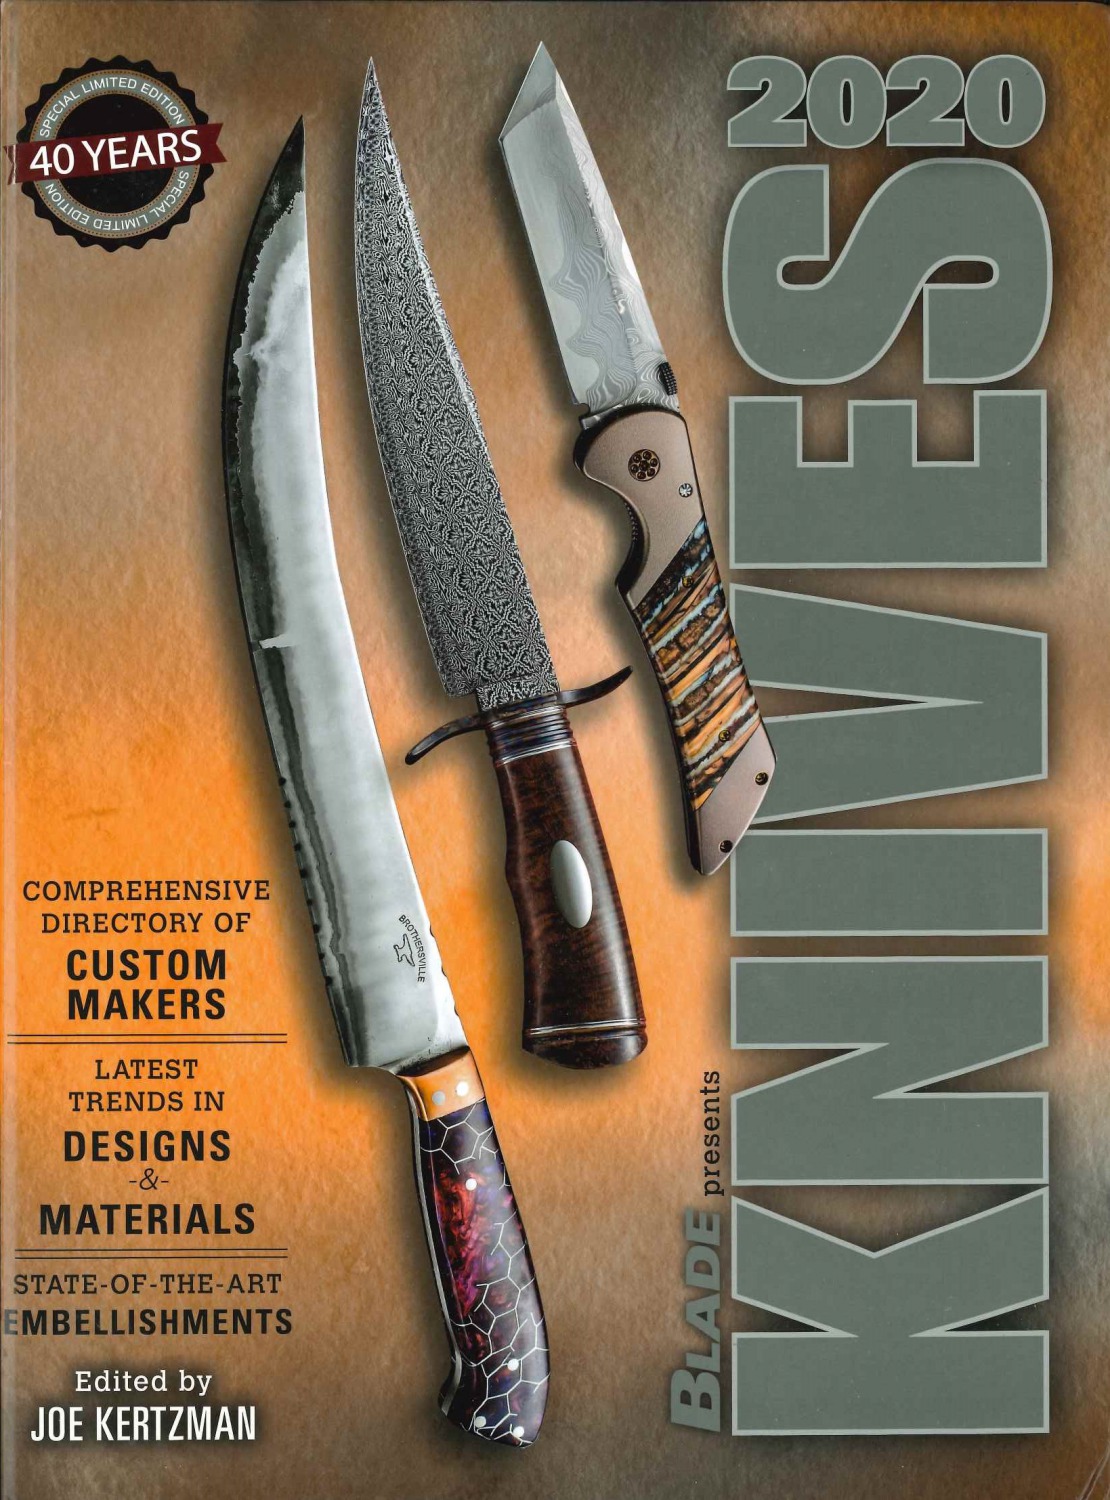 book_collection_knives2020